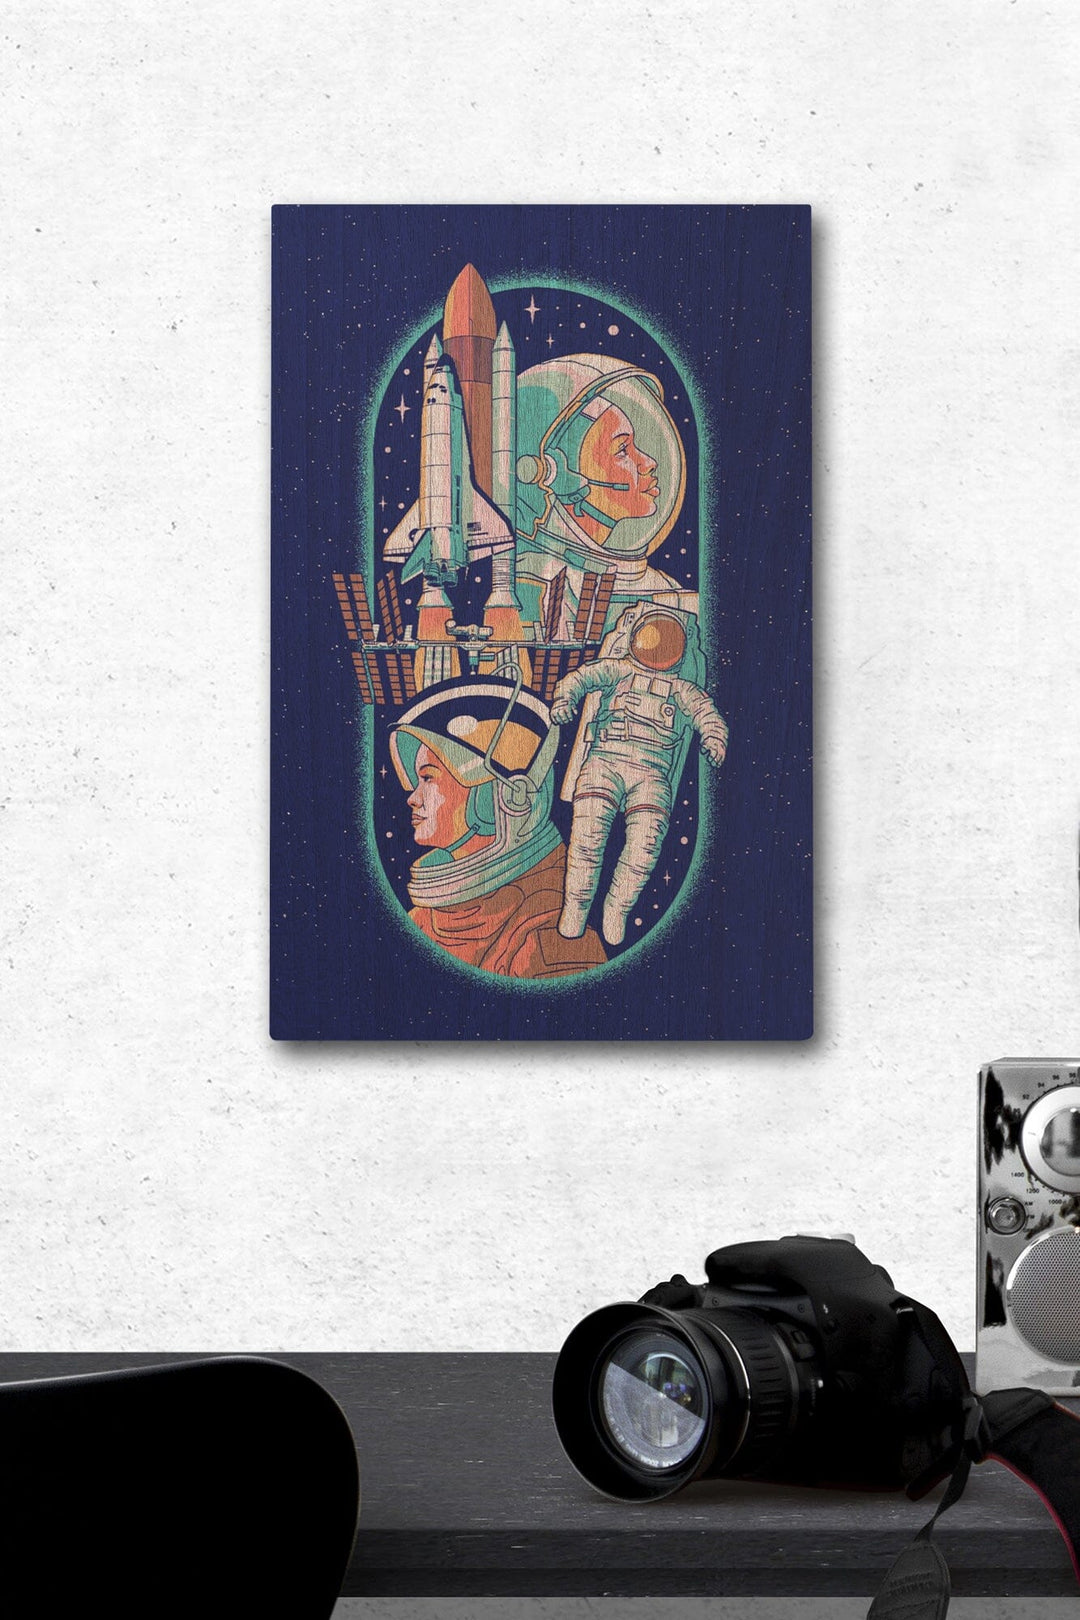 Space Queens Collection, Women in Space, Wood Signs and Postcards Wood Lantern Press 12 x 18 Wood Gallery Print 